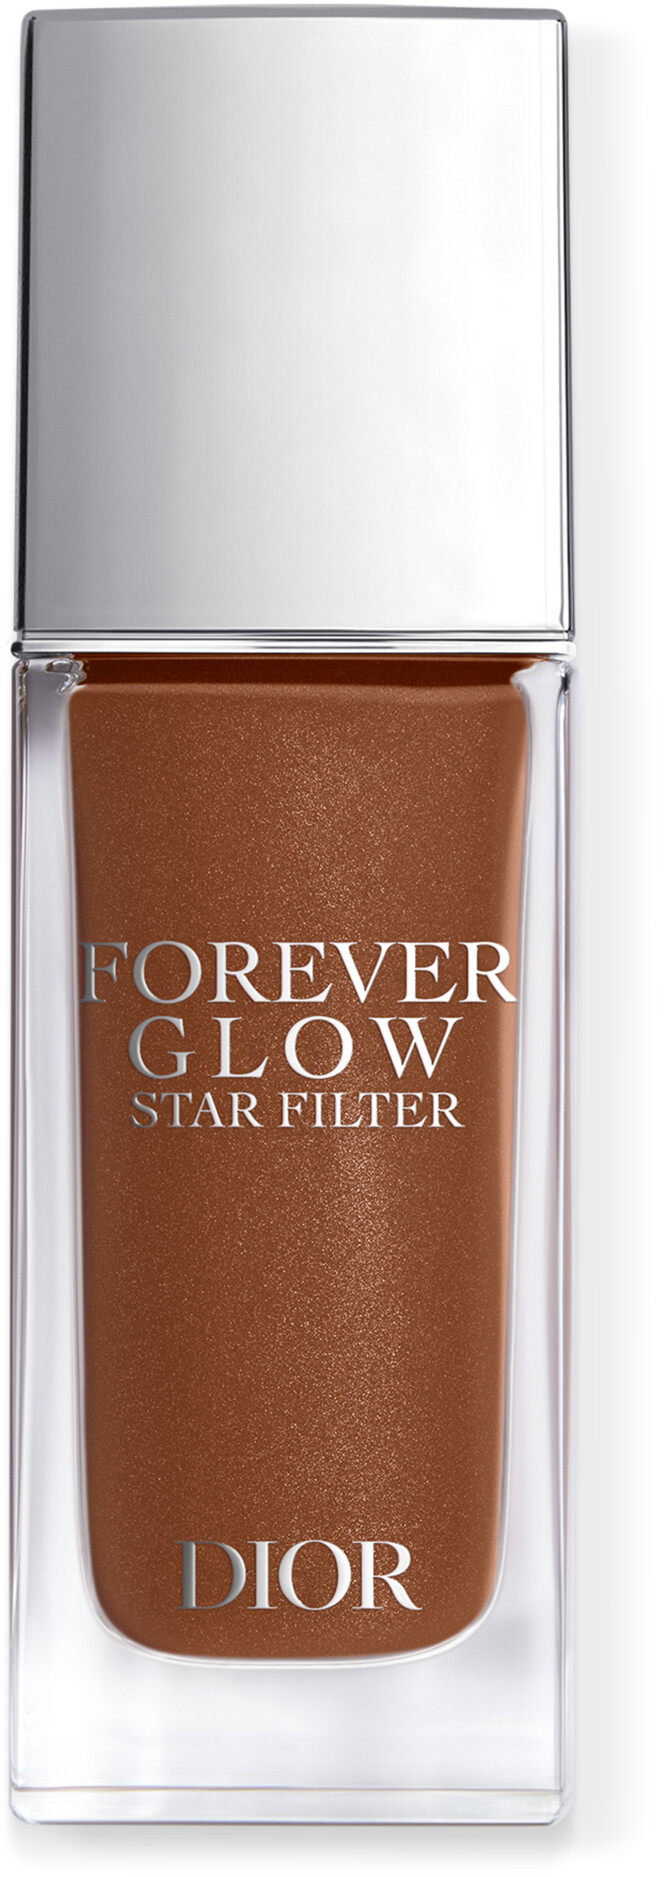 DIOR Forever Glow Star Filter 30ml 8